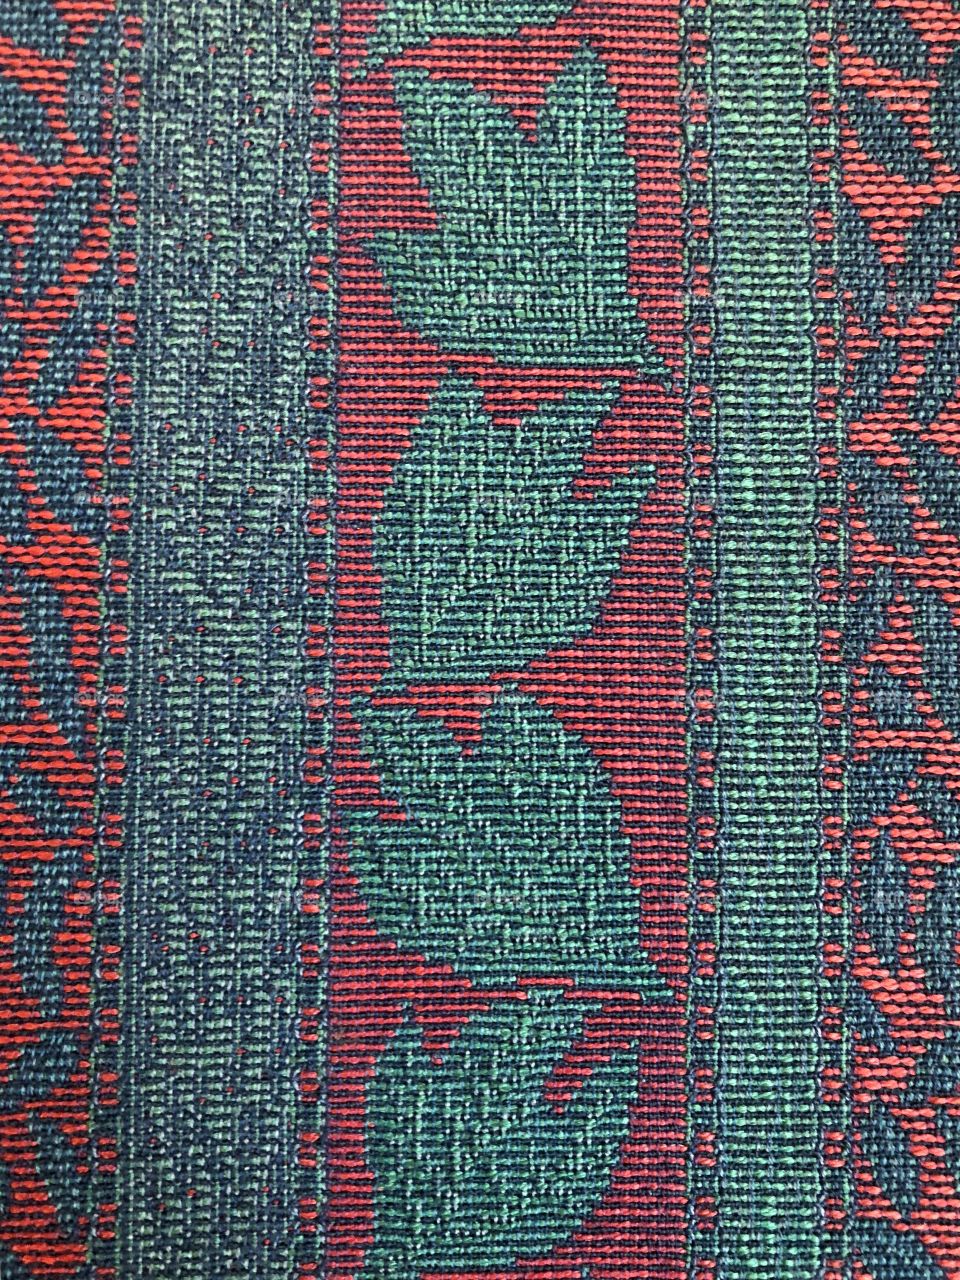 Old fabric on a streetcar seat sees new life when it is wholly showcased as the beautiful pattern it is.